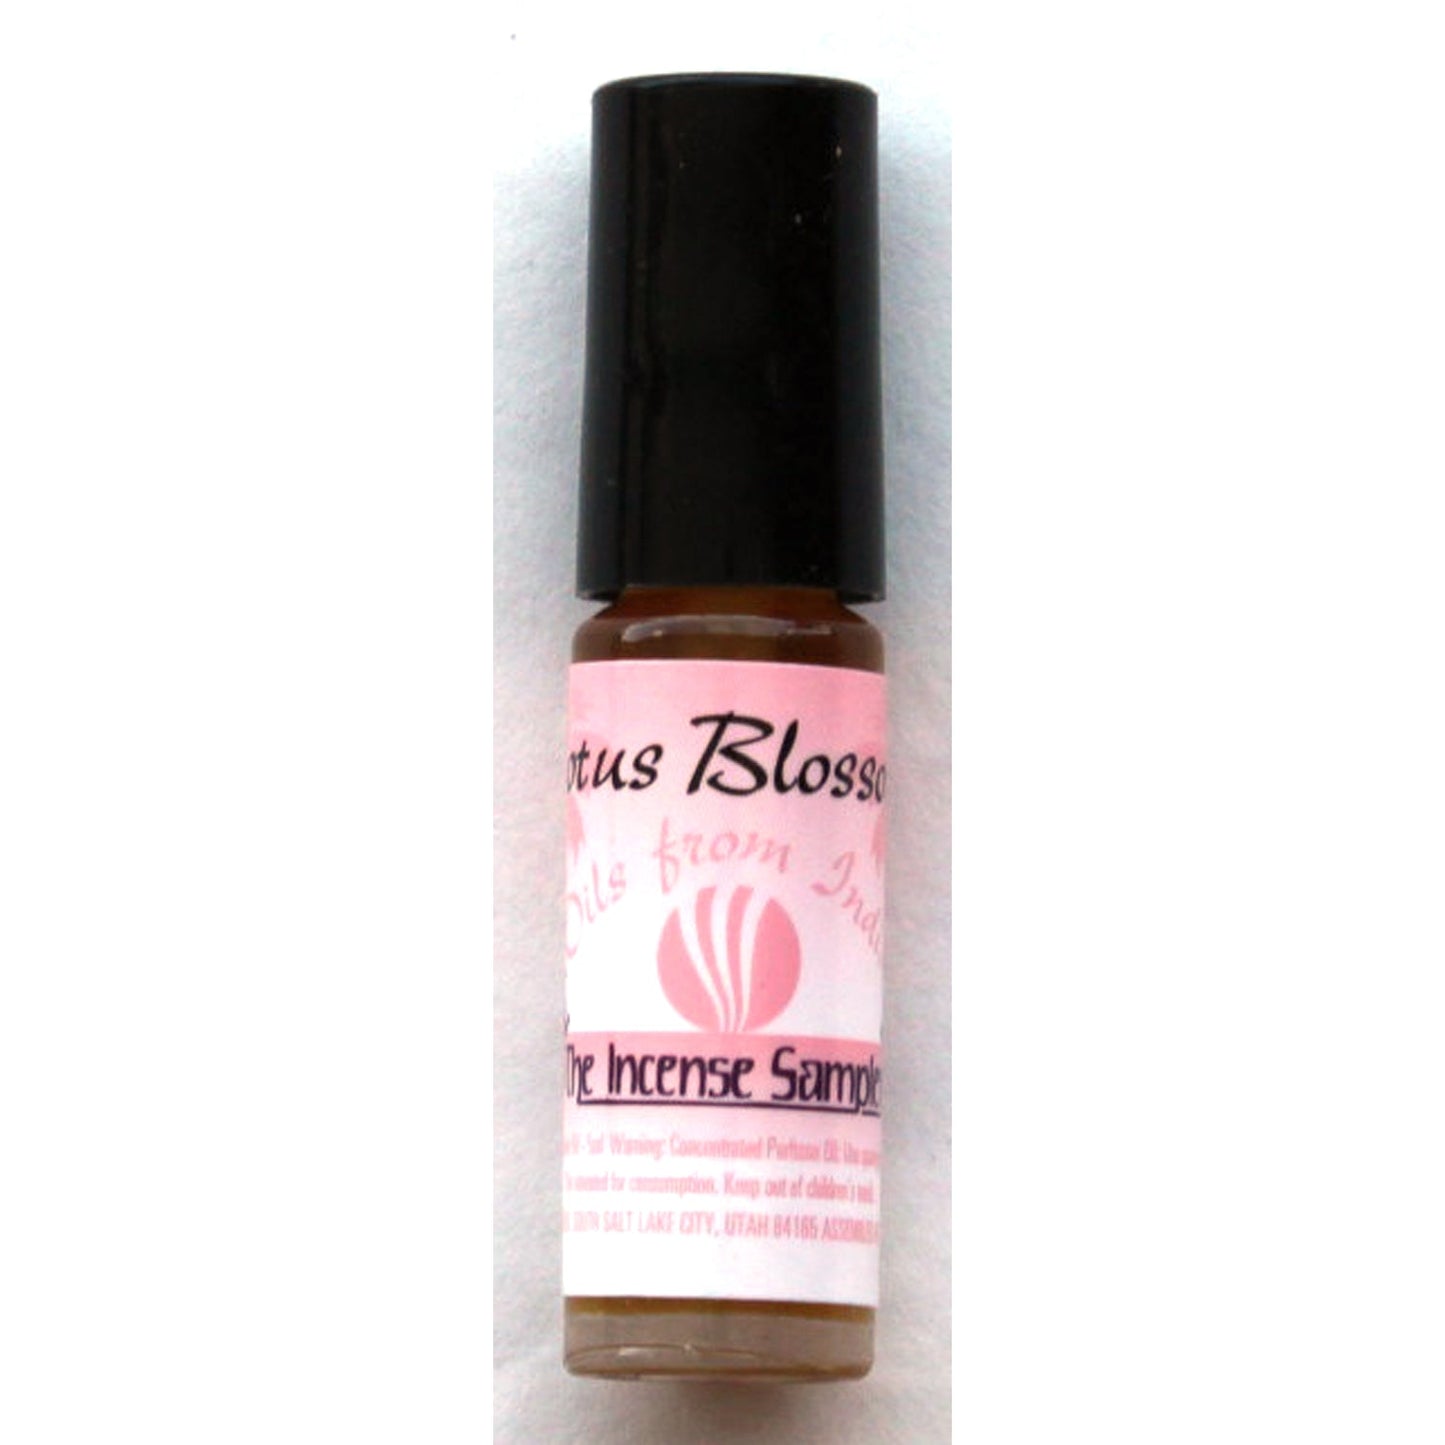 Oils From India - Lotus Blossom